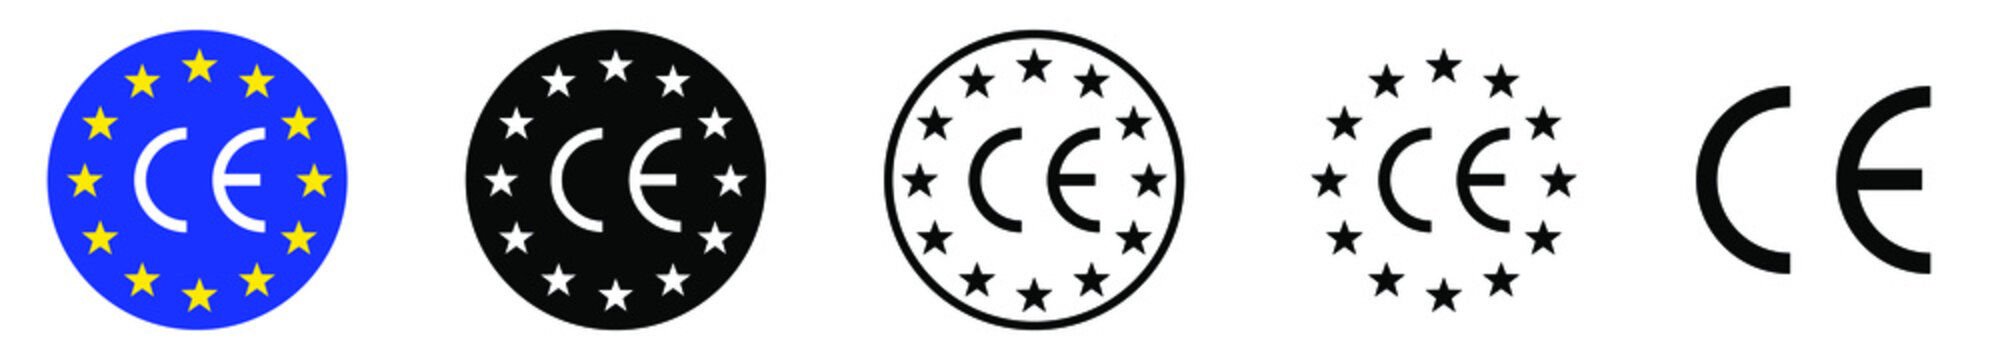 CE mark symbol. CE symbol isolated on white background. Set of black vector icons. European conformity certification mark.